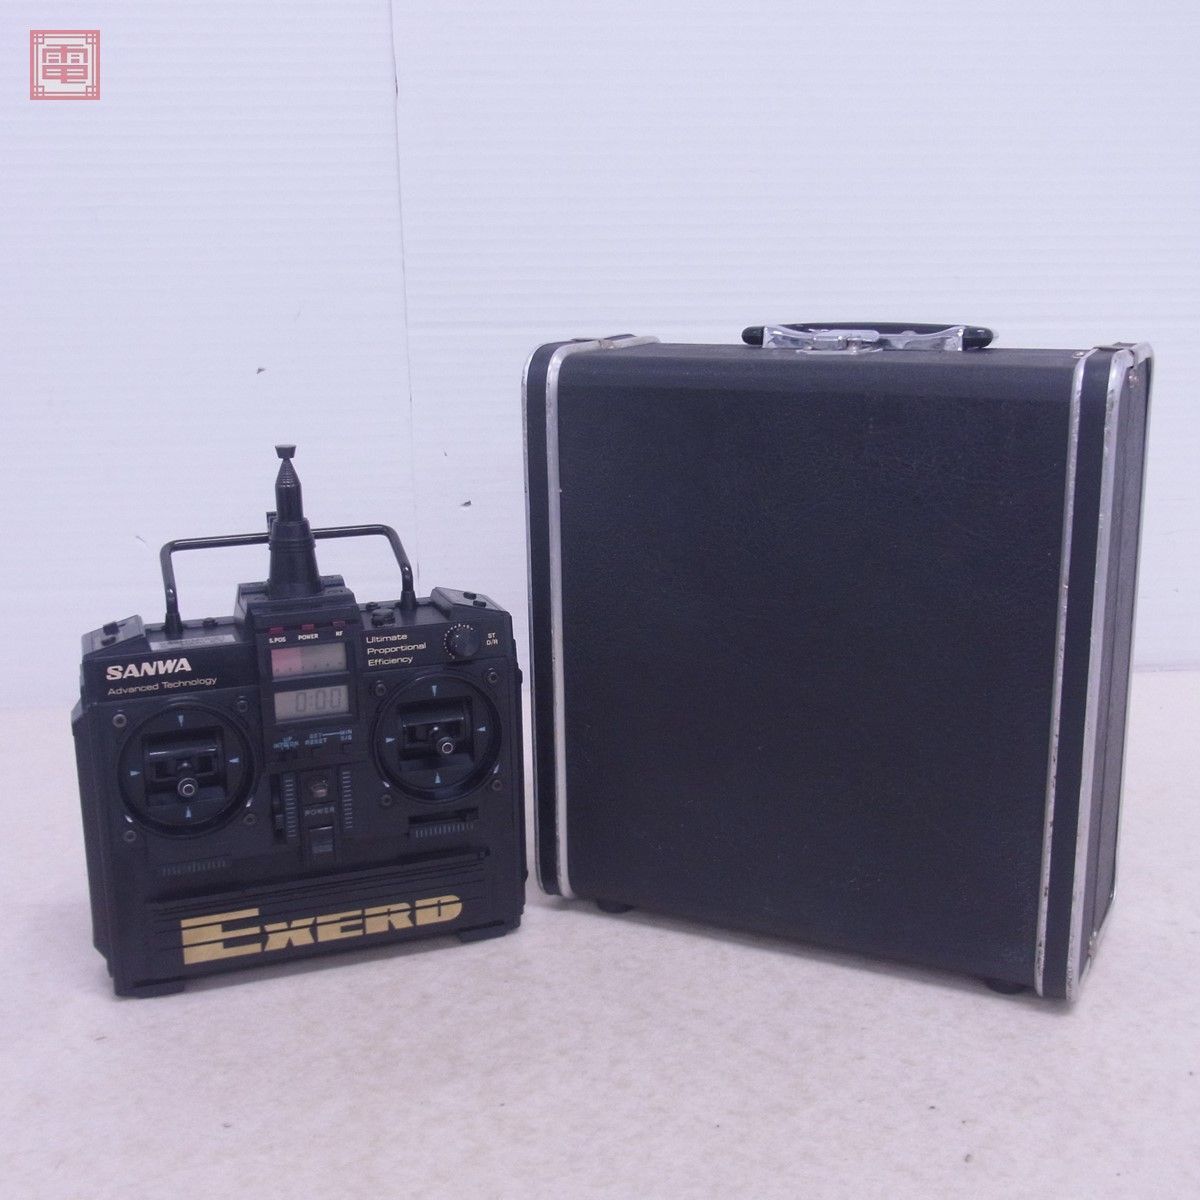  Sanwa EXERD Propo transmitter 27MHz FM RF MODULE TM1150 case attaching electric RC radio-controller SANWA electrification only verification settled present condition goods [20